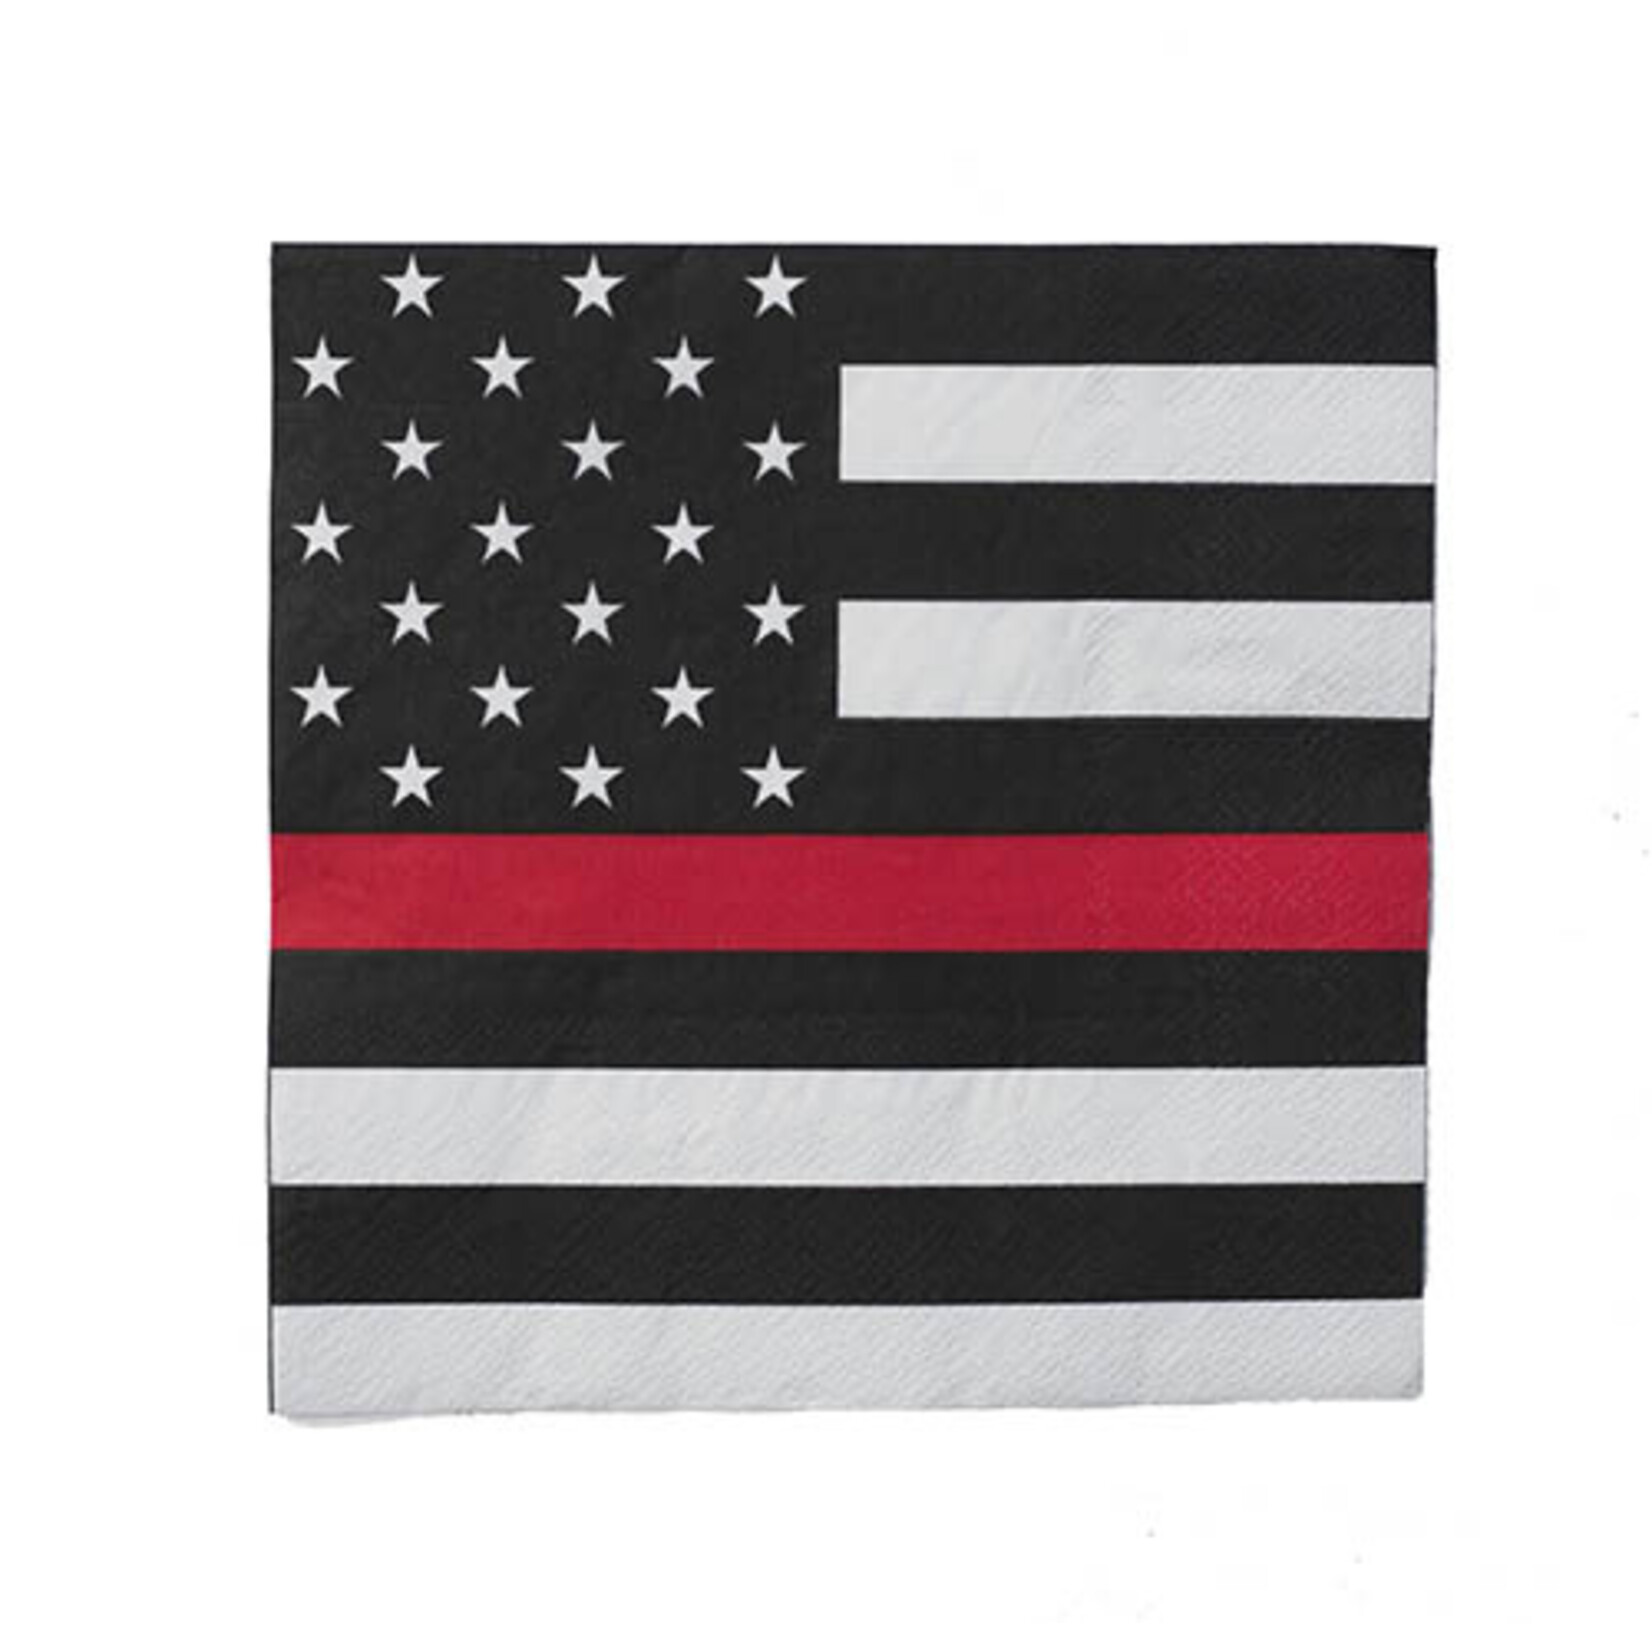 Havercamp Fire & Emt Thin Red Line Lunch Napkins - 16ct.